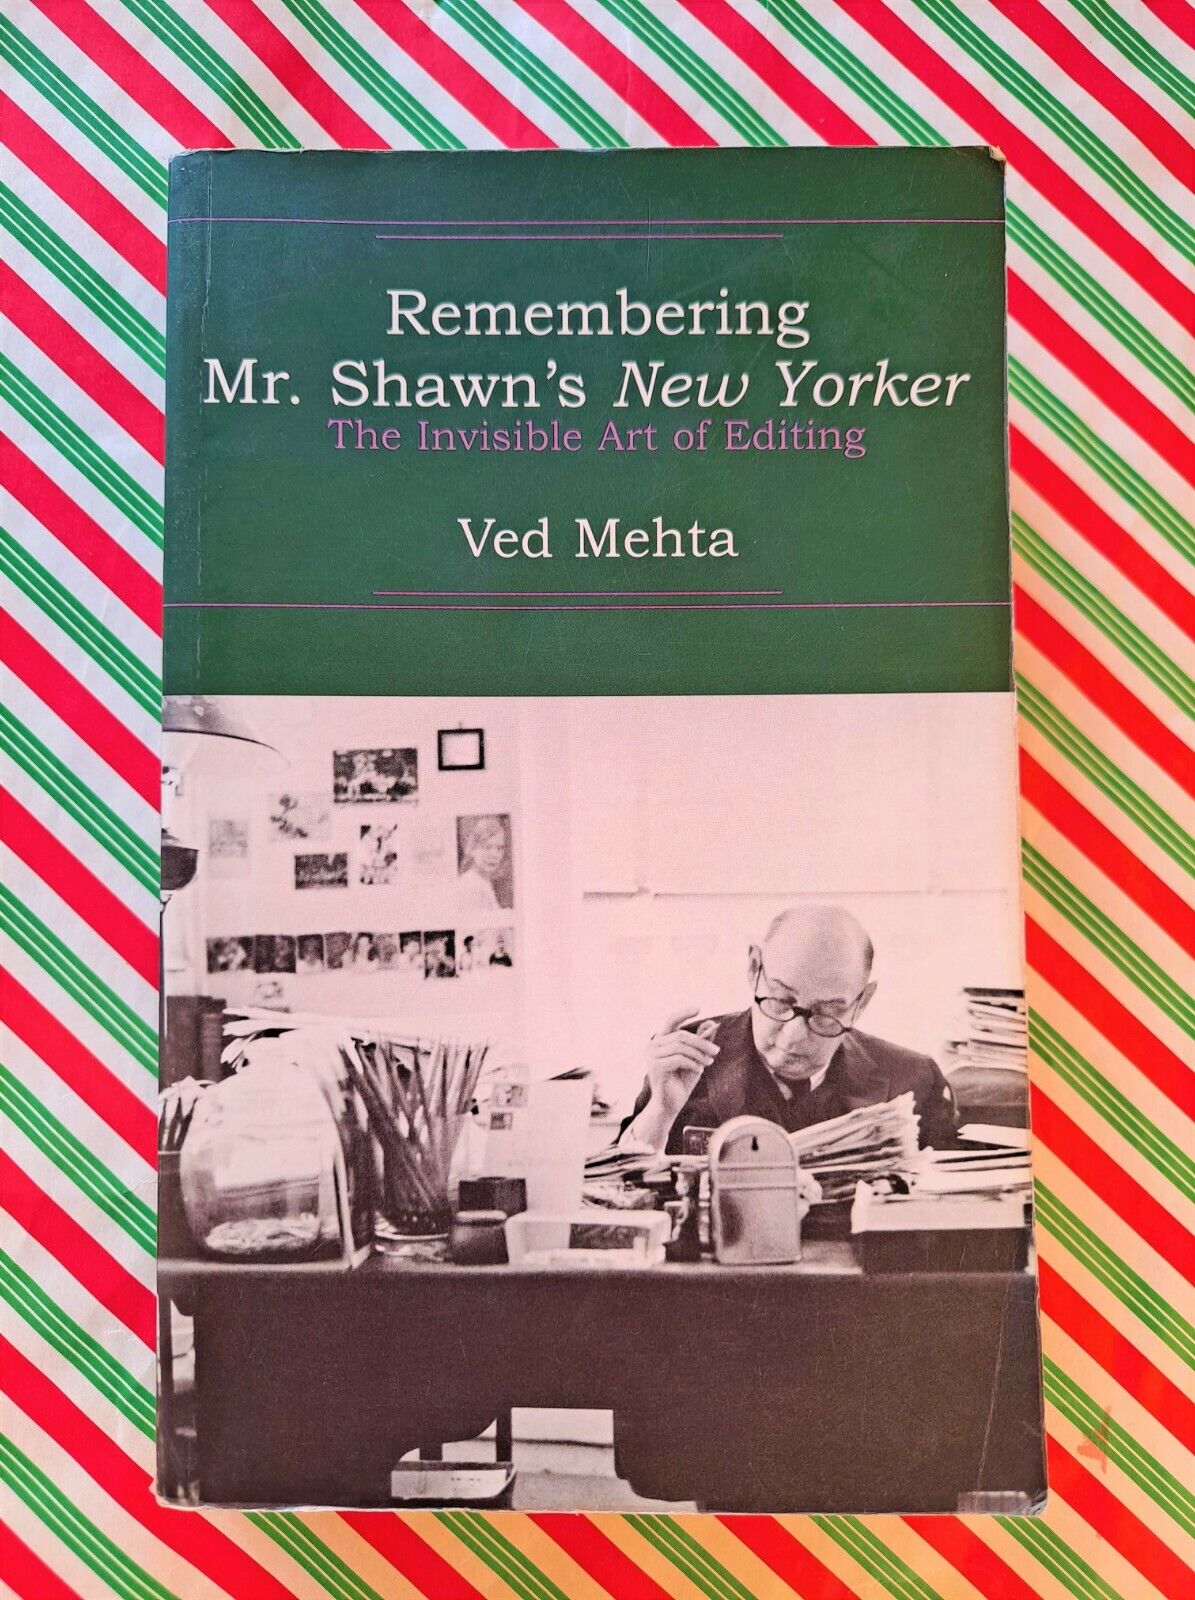 Remembering Mr. Shawn's New Yorker The Invisible Art of Editing by Ved Mehta